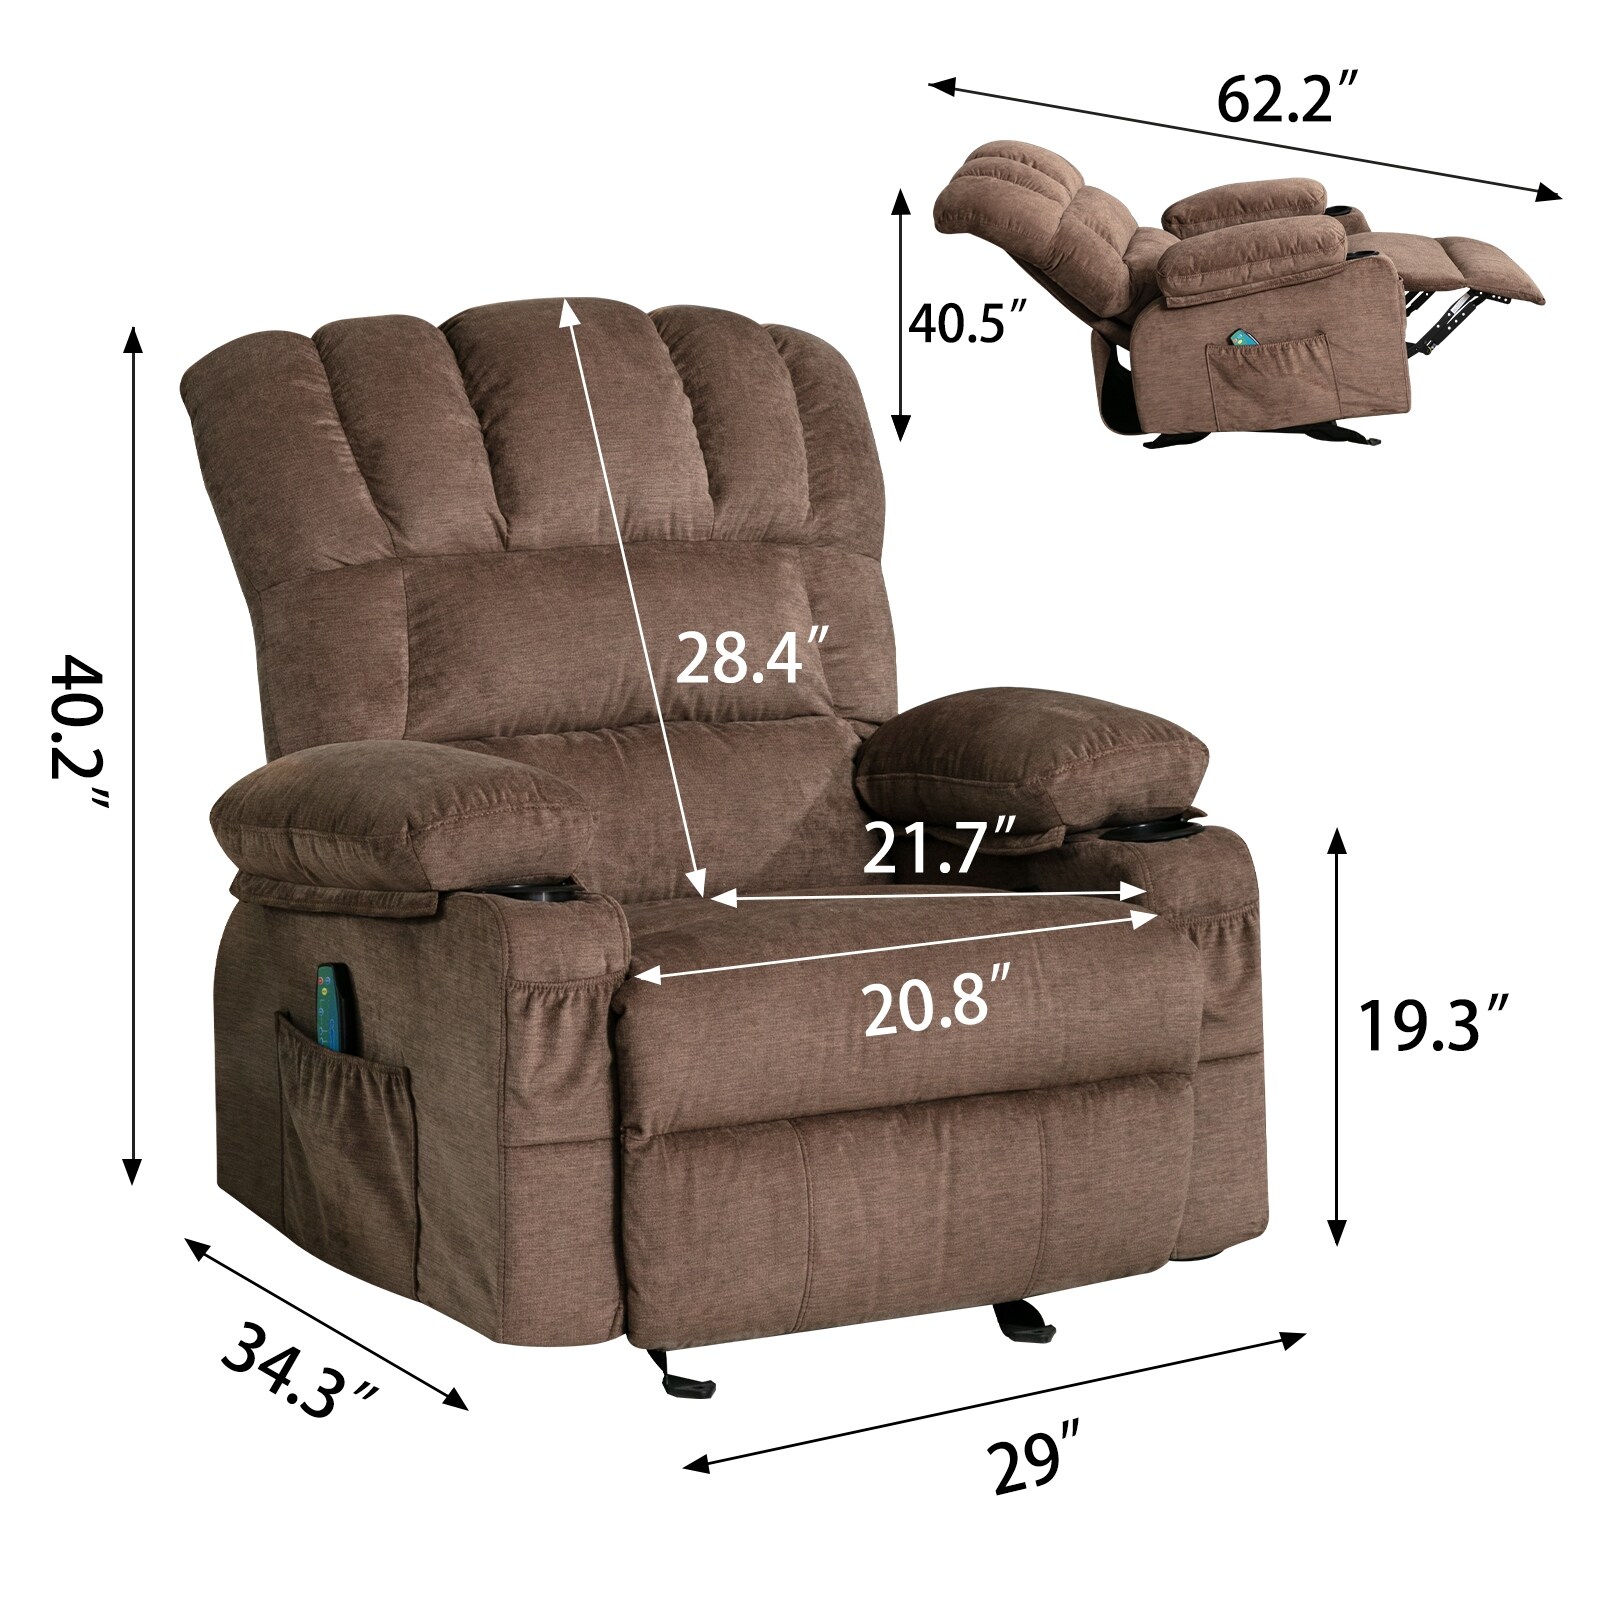 Brown Power Recliner Chair with Adjustable Rocking, Heating, and Massage